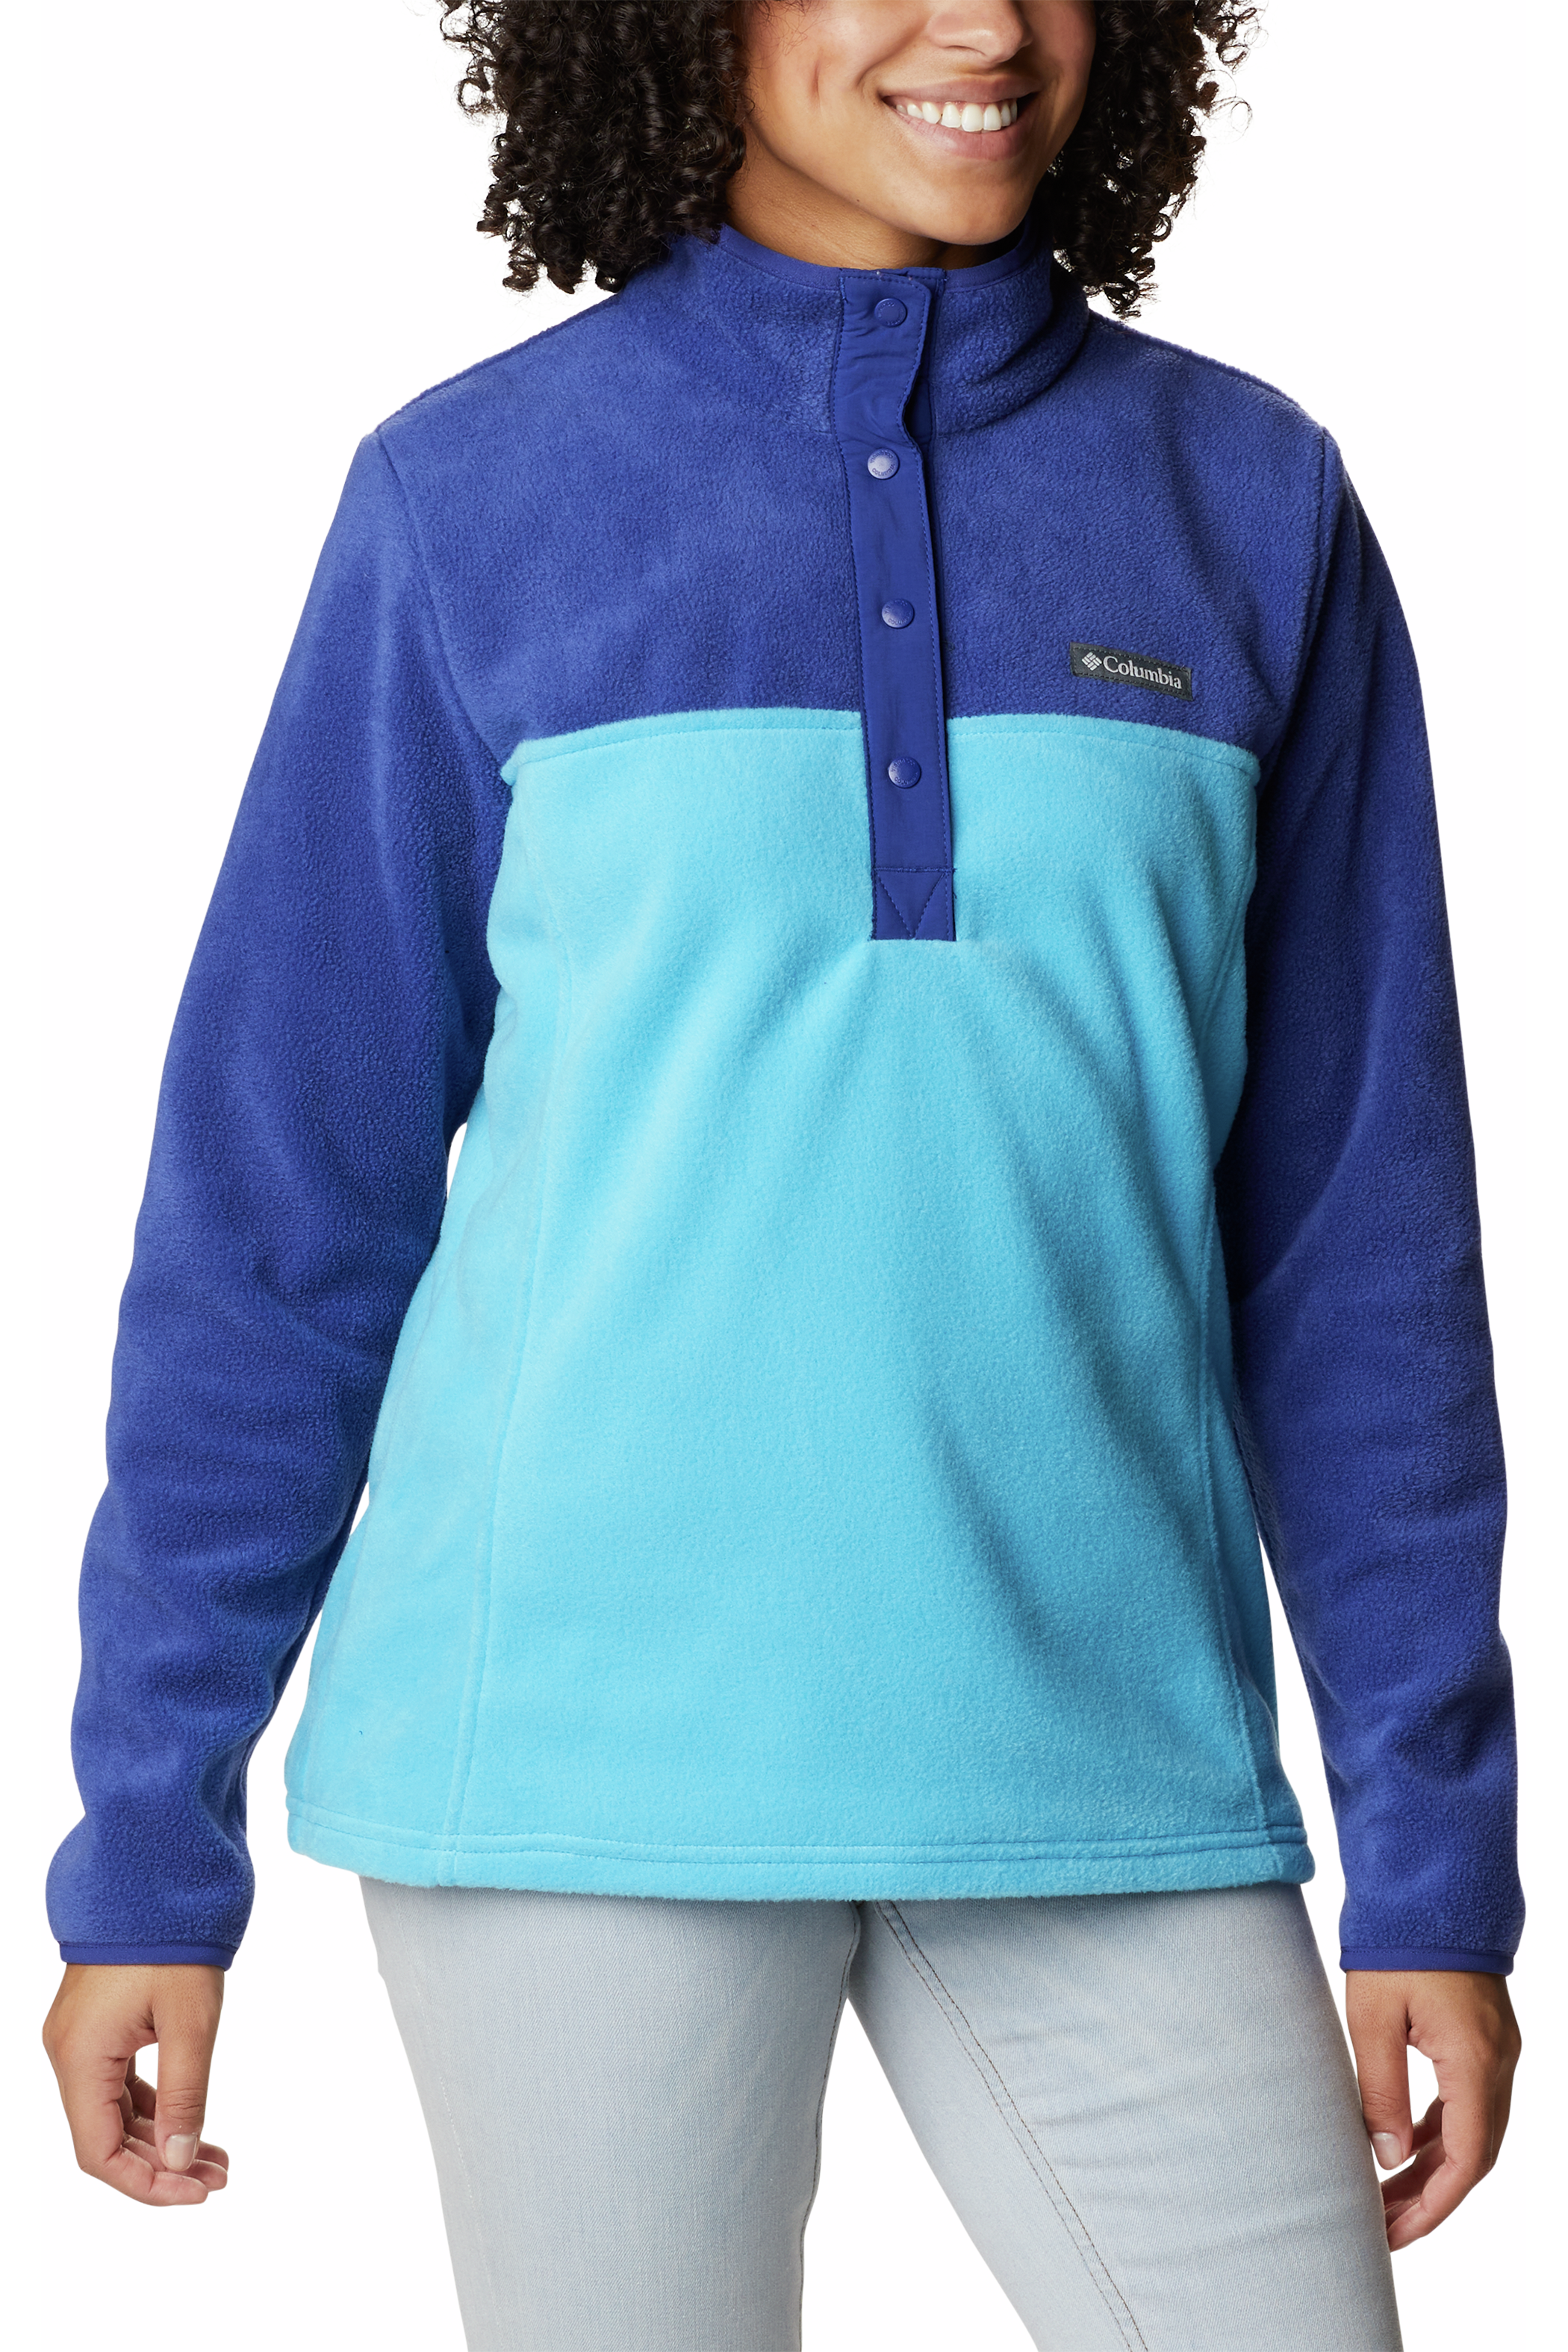 Columbia Benton Springs 1/2 Snap Pullover - Style 1860991422, front2